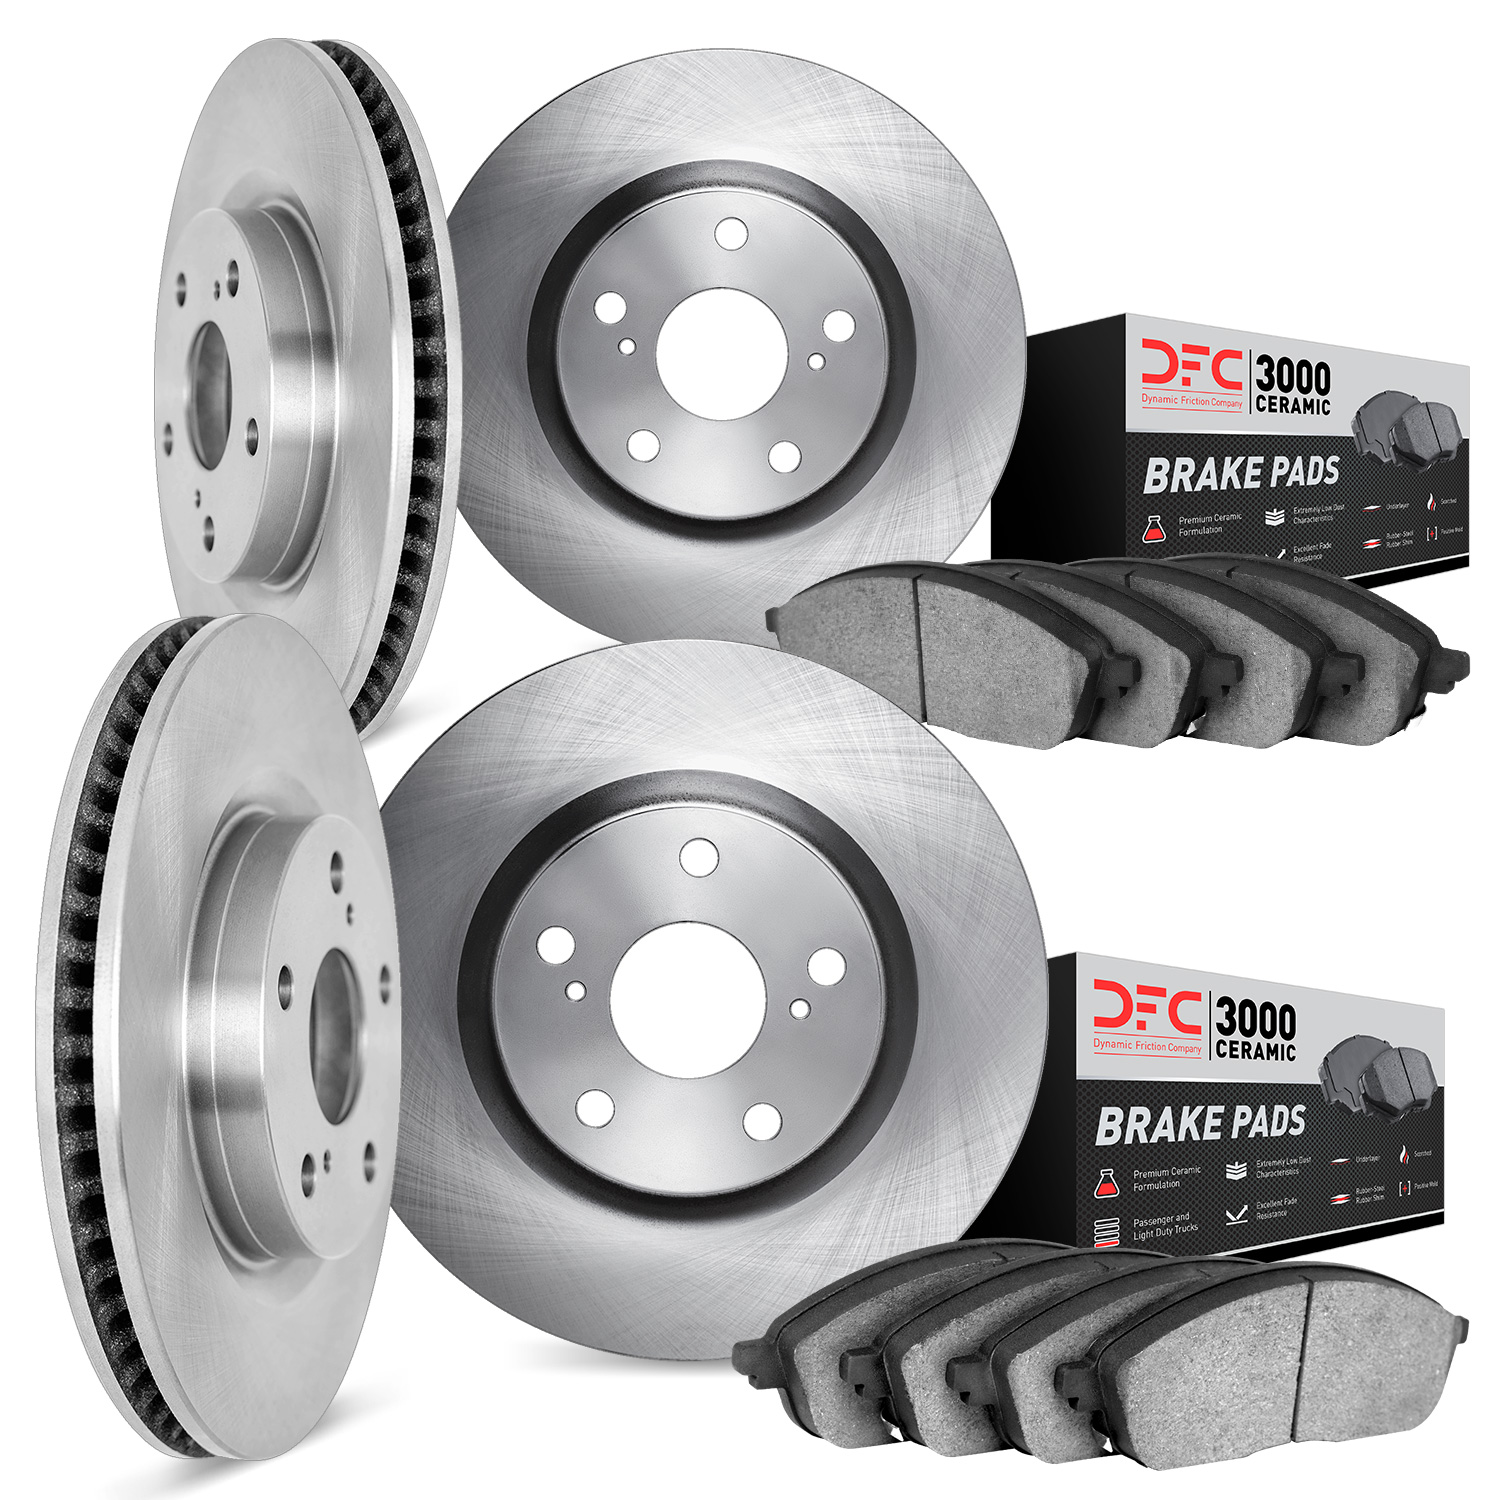 6304-39020 Brake Rotors with 3000-Series Ceramic Brake Pads Kit, 2006-2014 Mopar, Position: Front and Rear